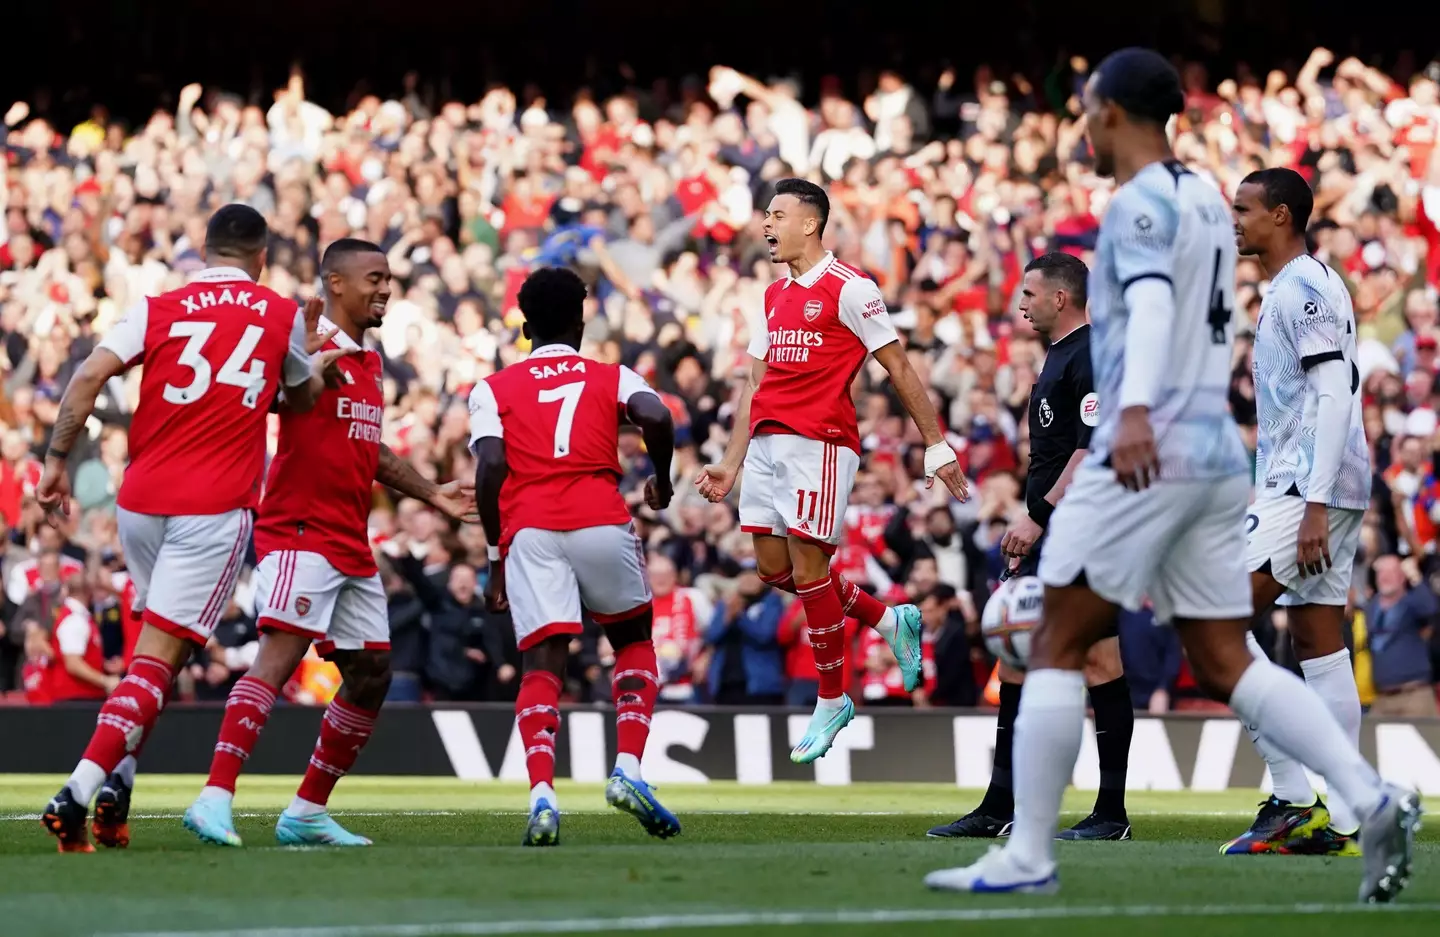 Arsenal players celebrating against Liverpool. (Image